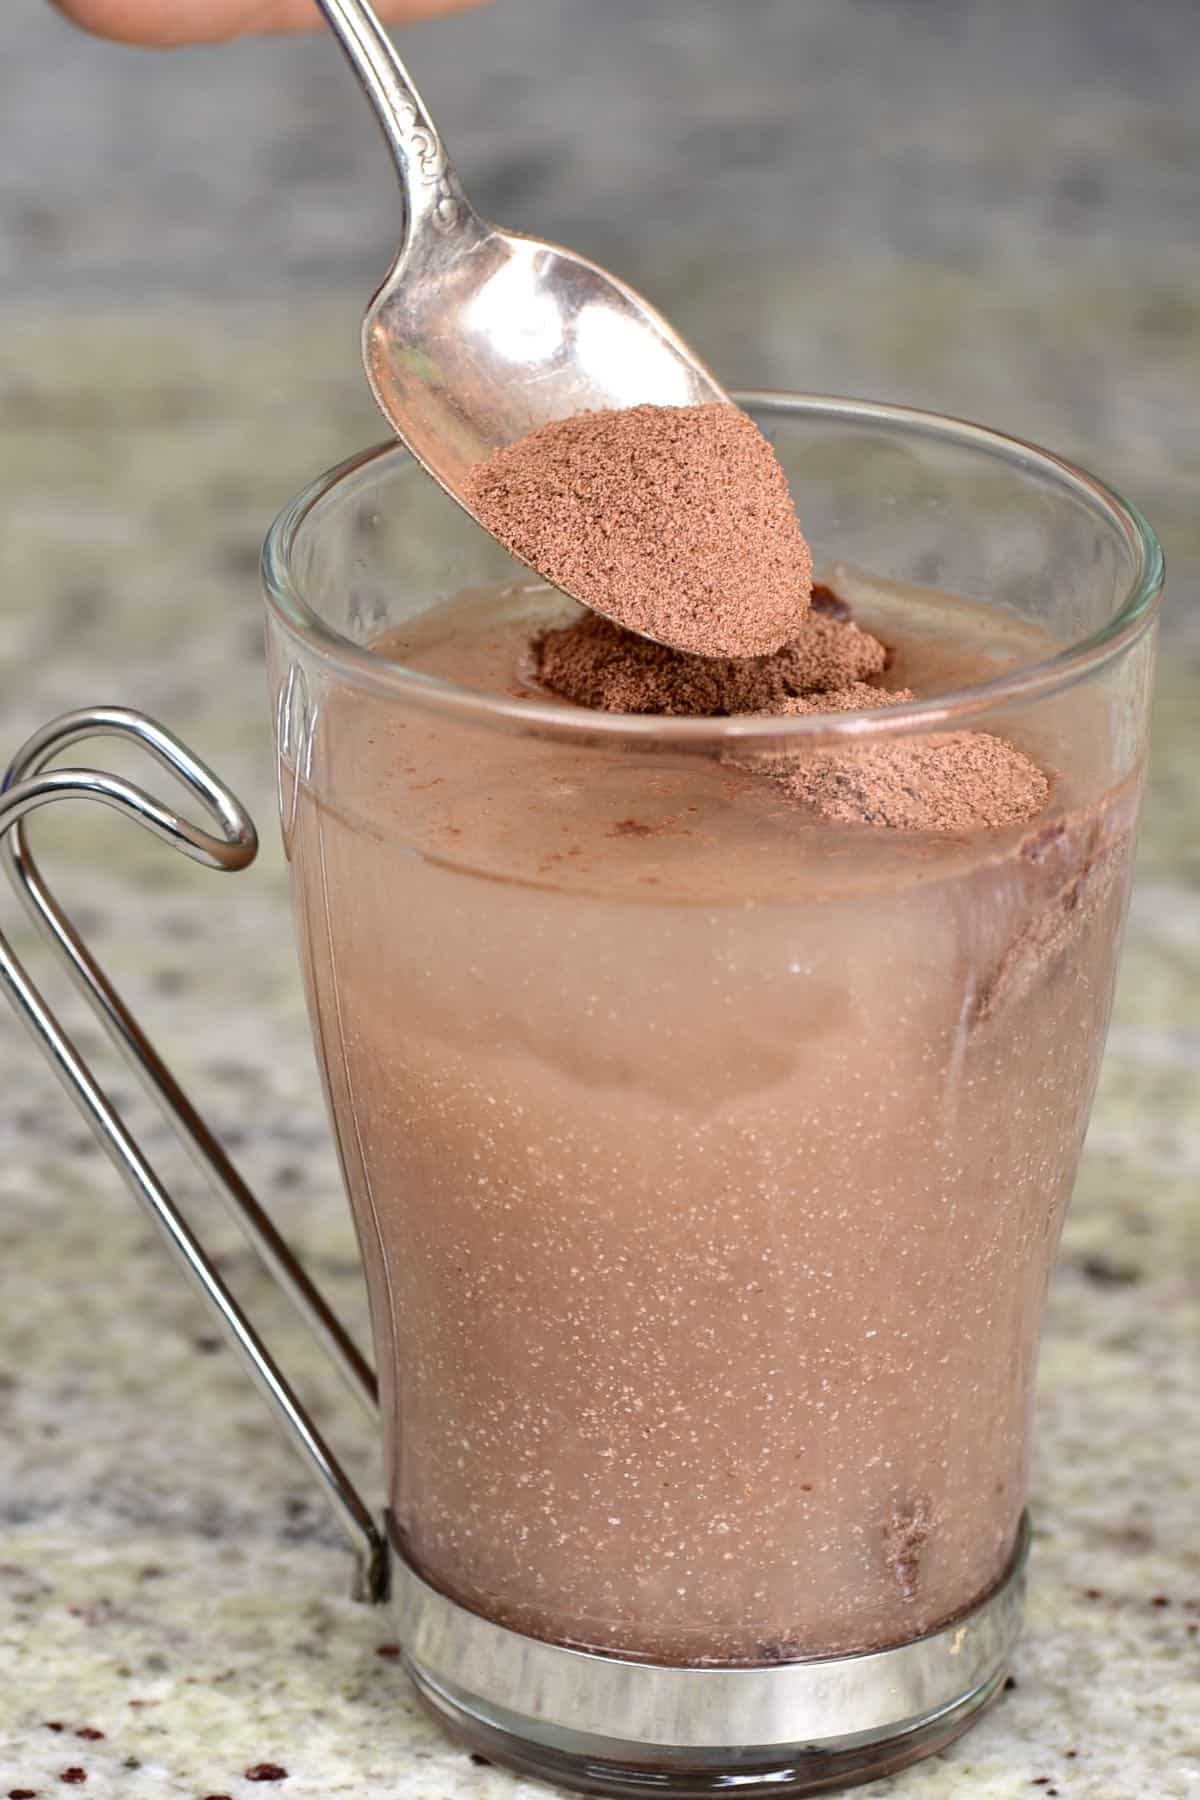 Adding hot chocolate mix to a glass of water